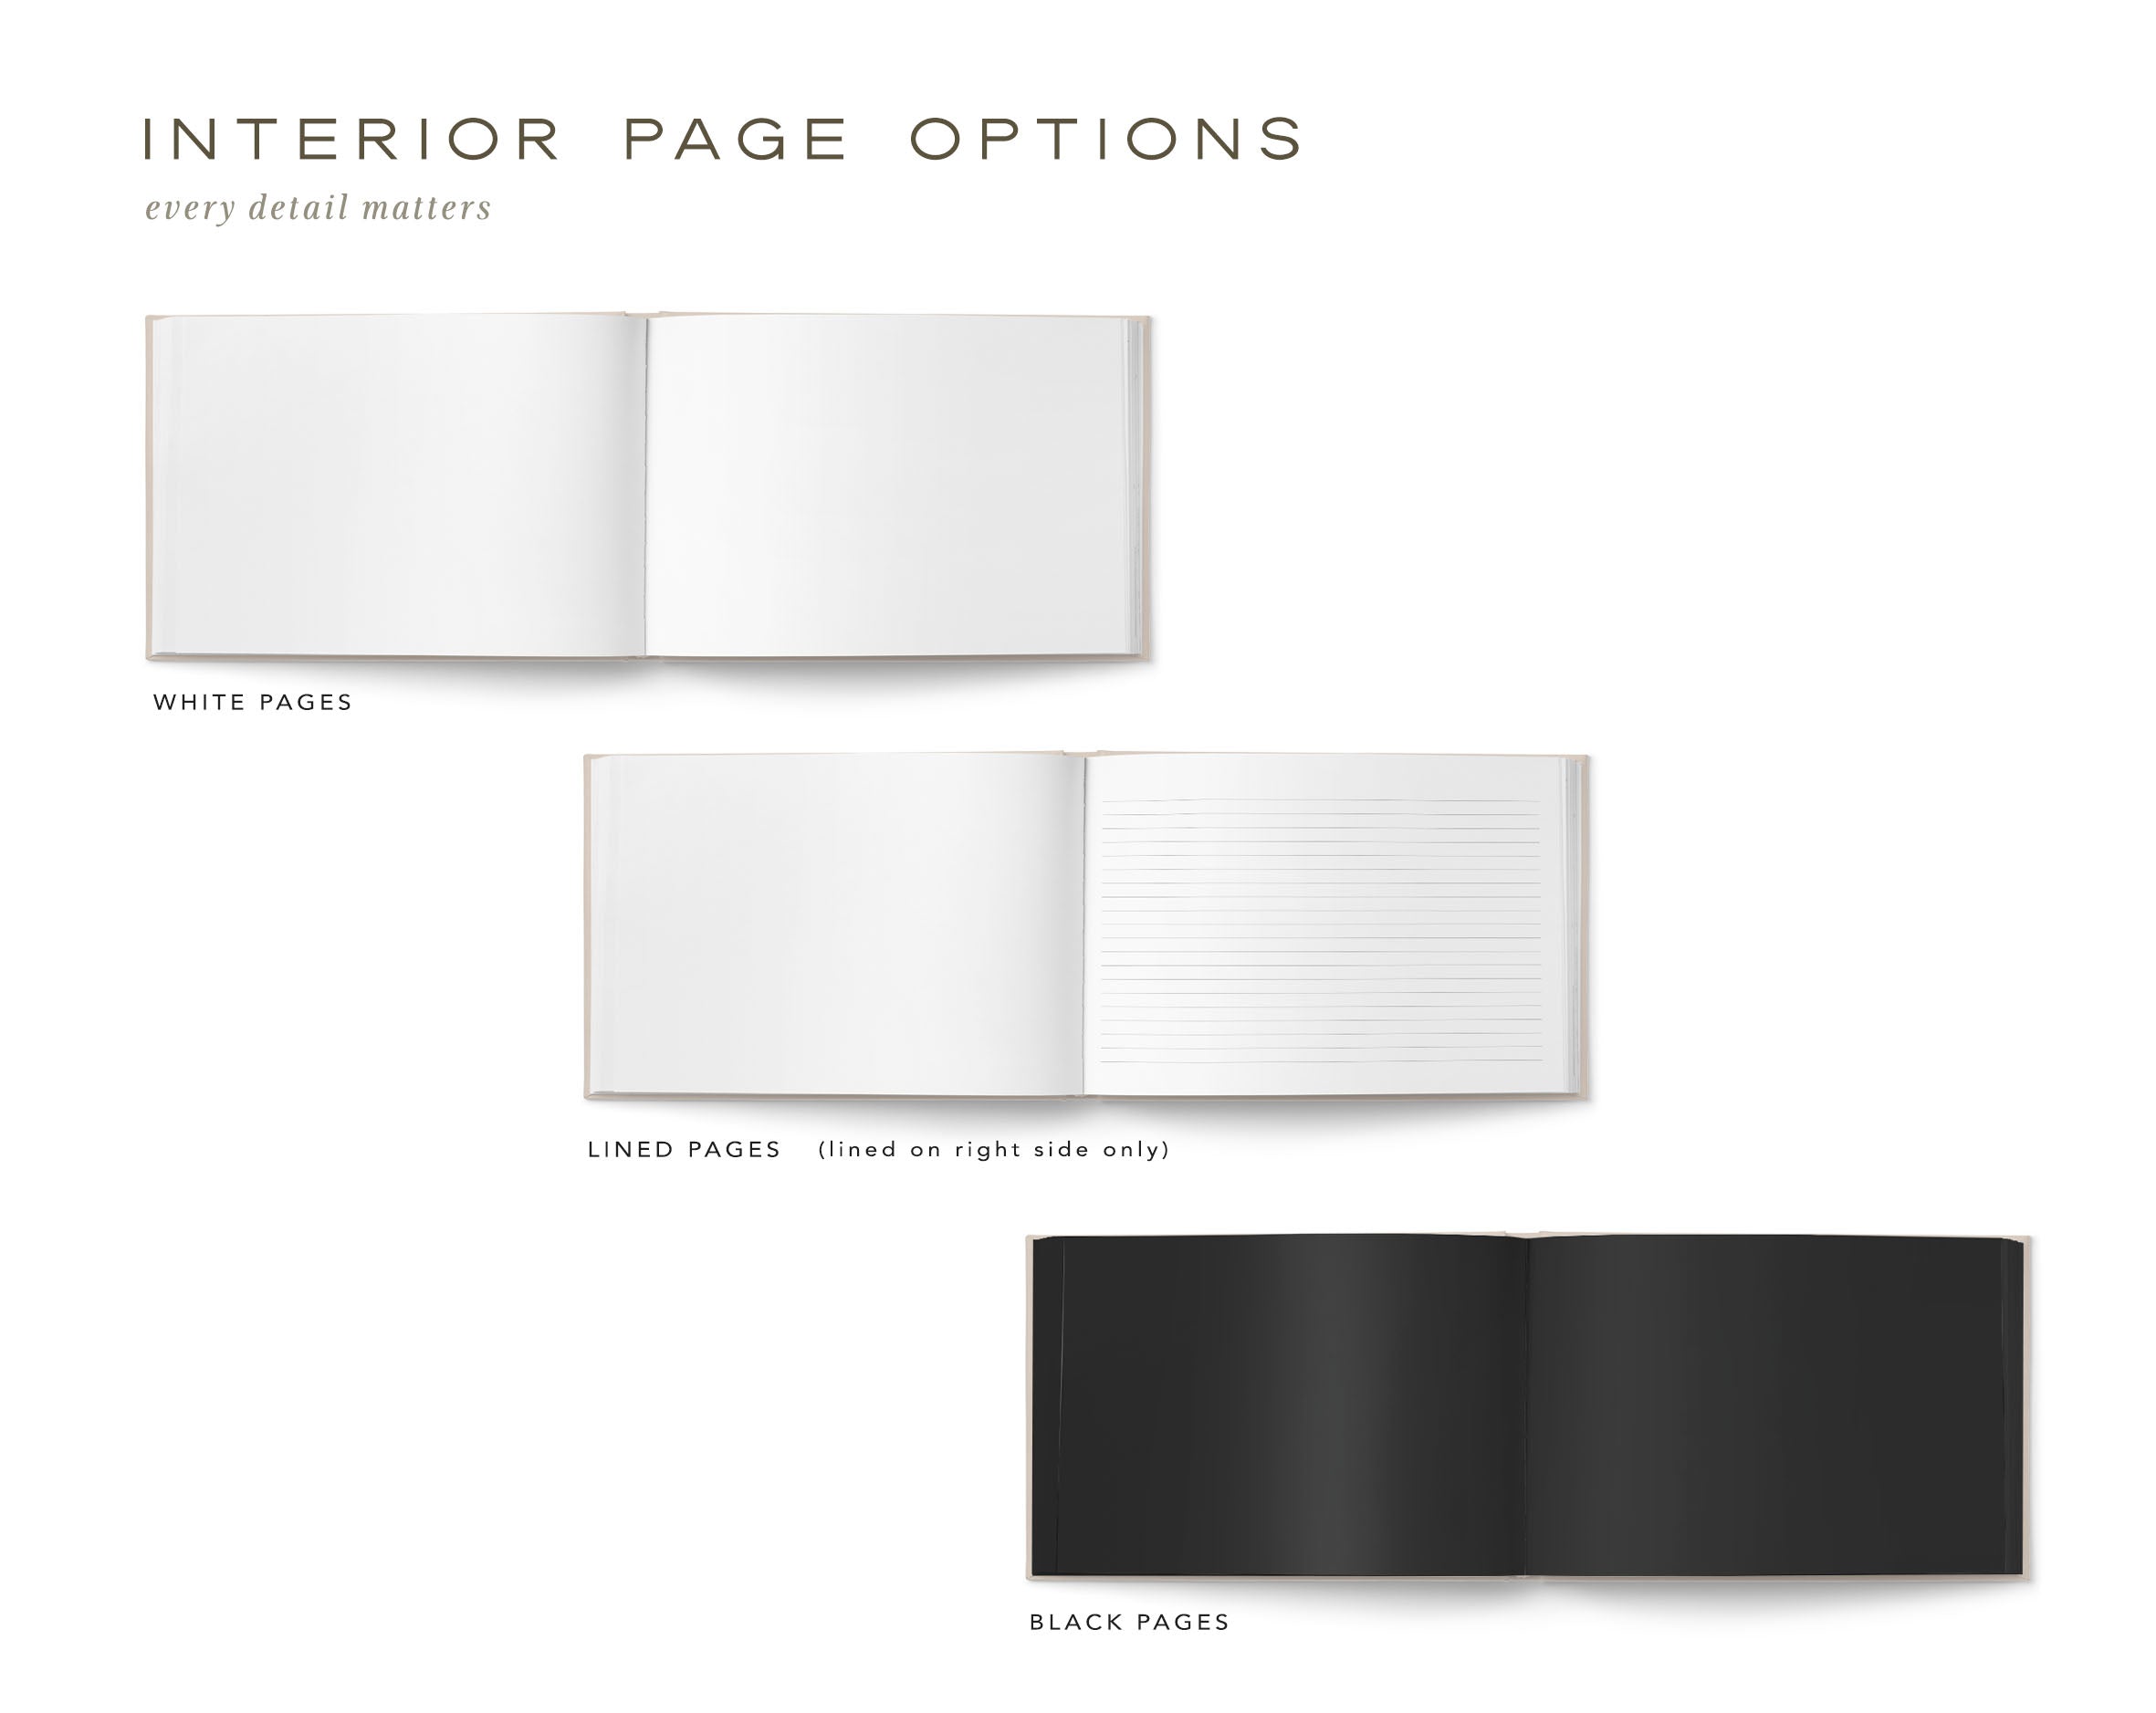 Guest Book Interior Page Options